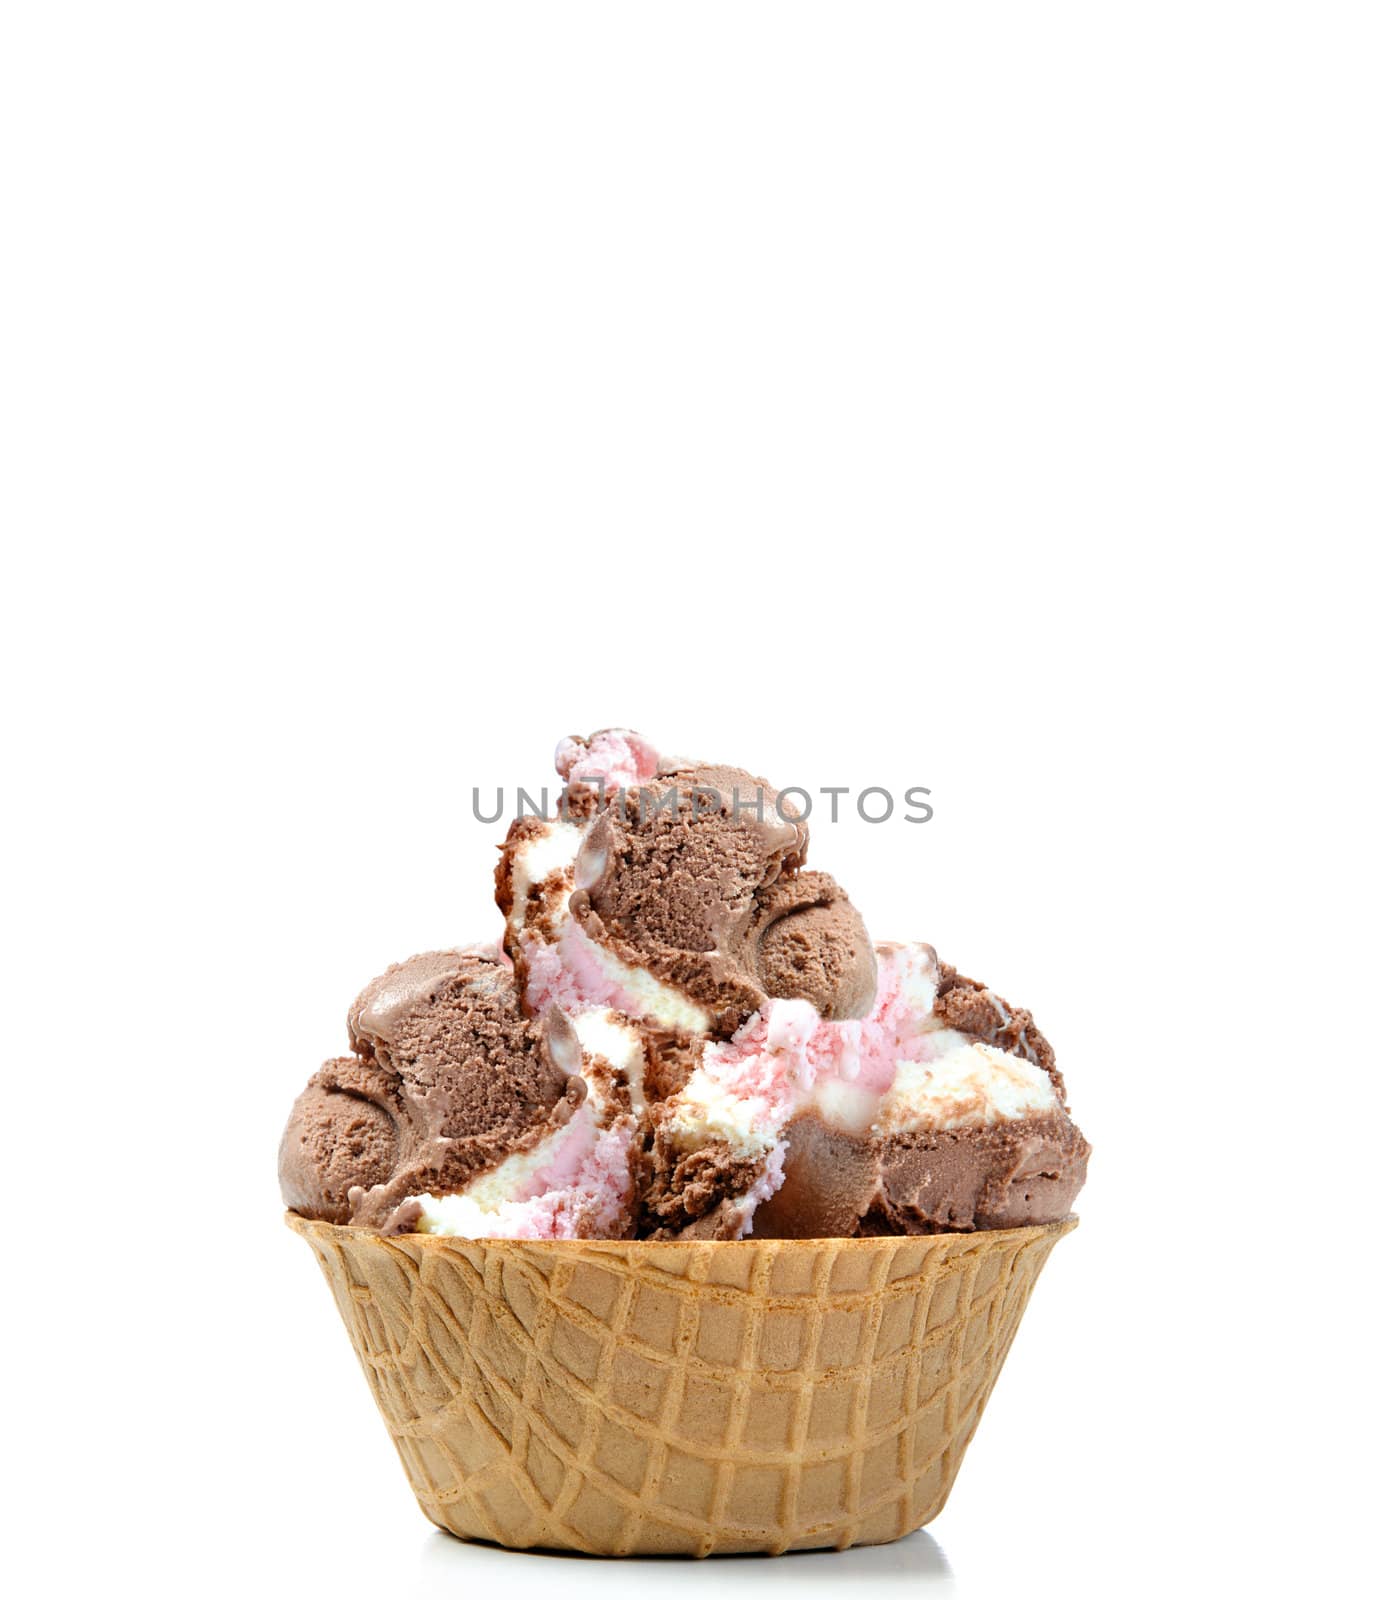 Chocolate and Vanilla icecream pile high in a wafer bowl, isolated against a white background with additional space on top for text.